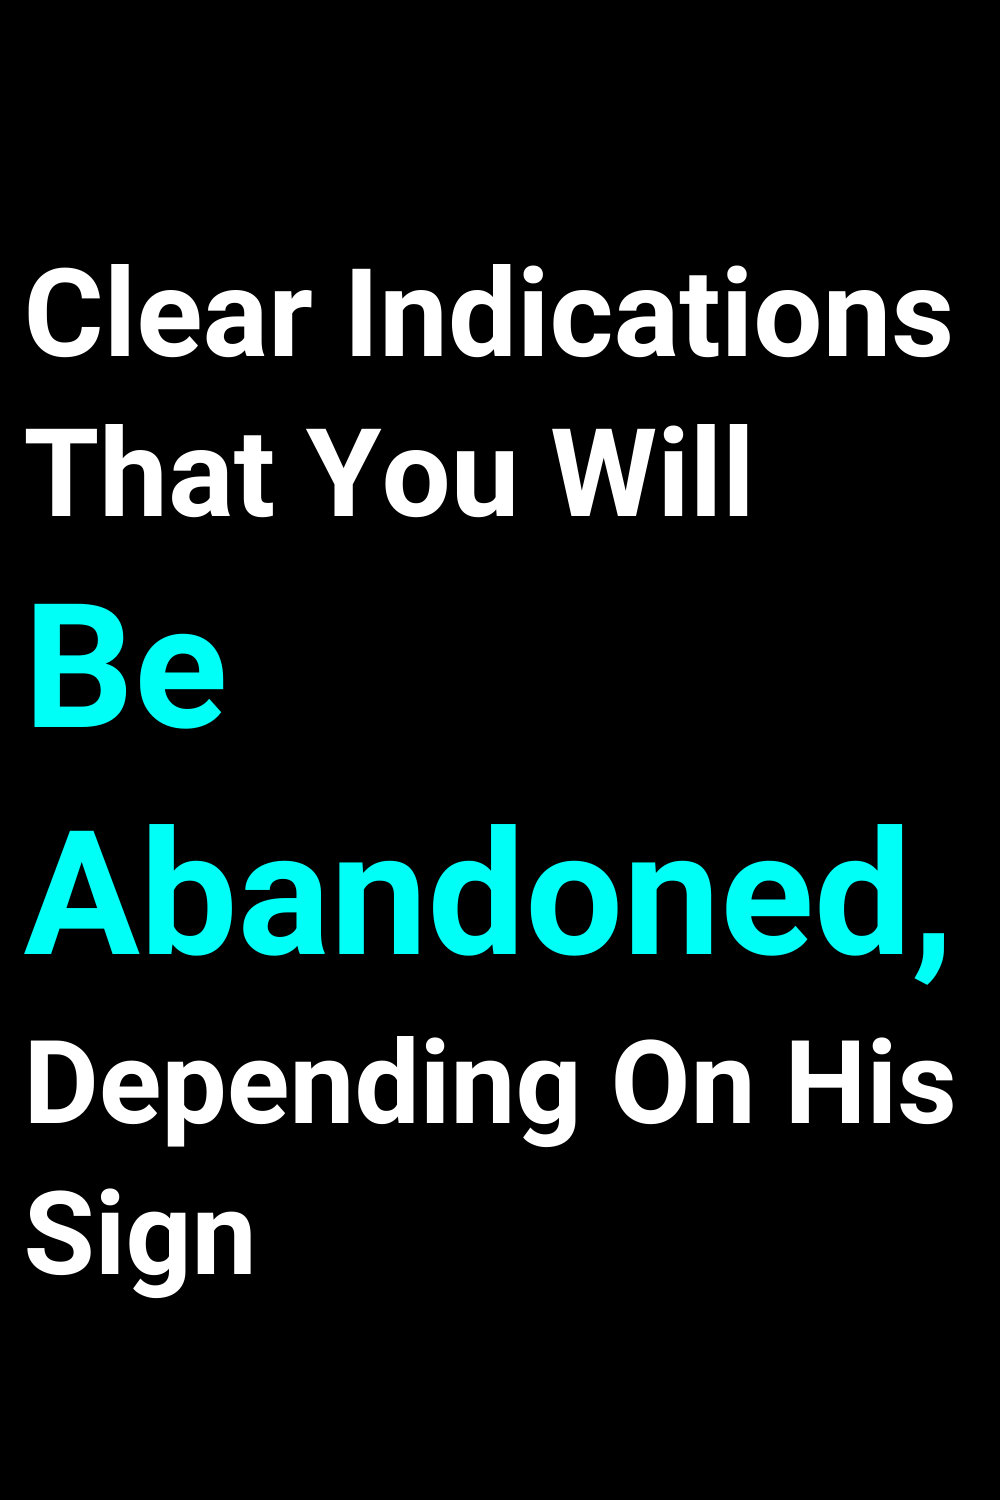 Clear Indications That You Will Be Abandoned, Depending On His Sign